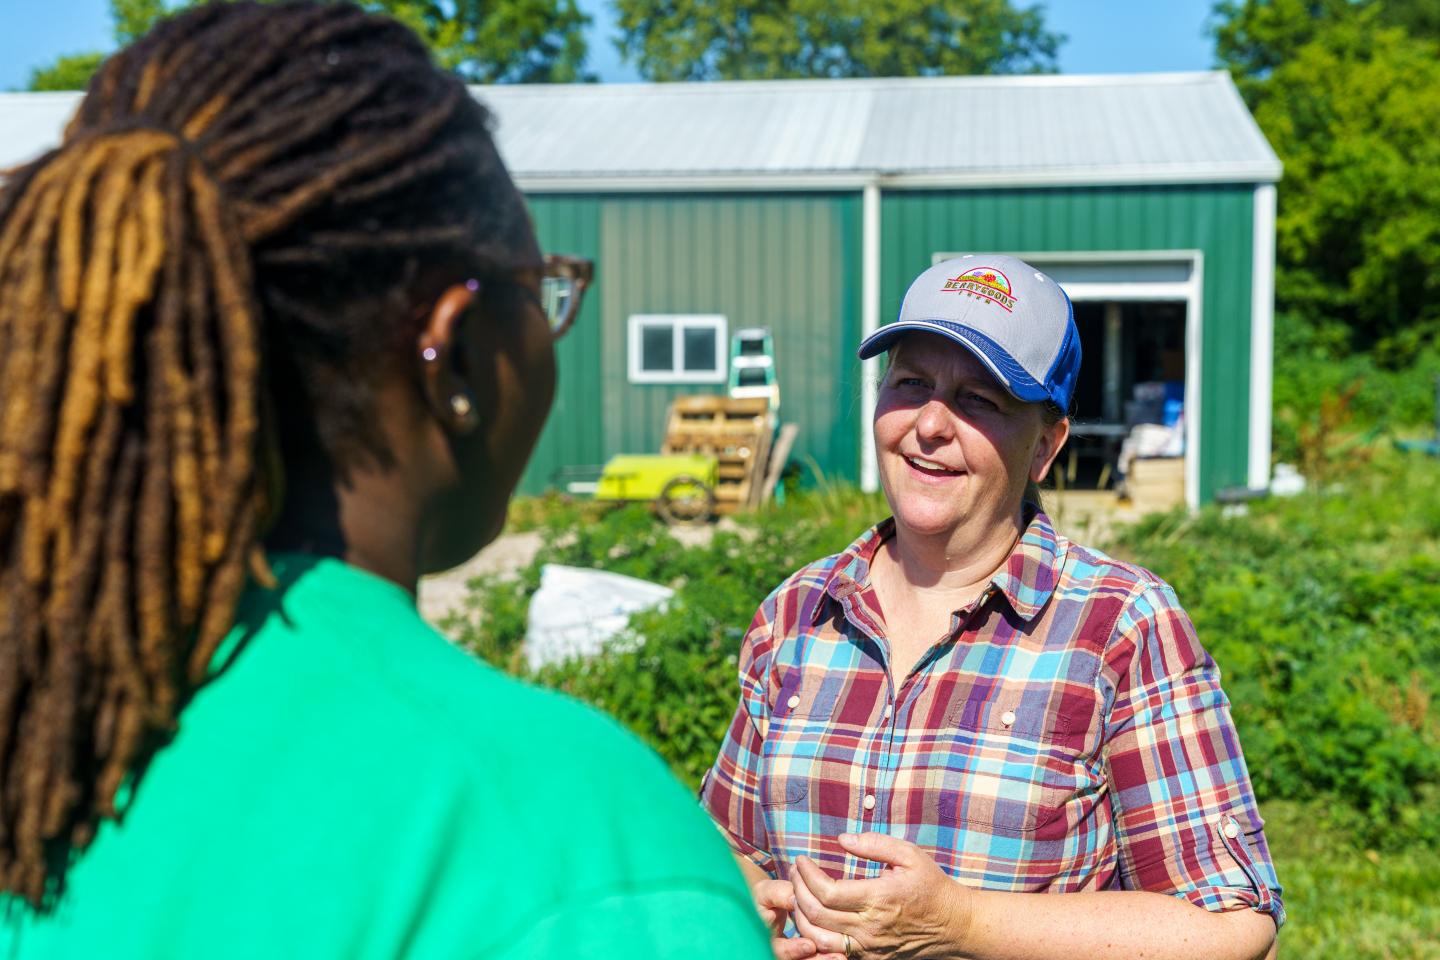 Sydnee Lockett (left) talks to Amy Surburg about her farming operation at Berry Goods Farm in Indiana.